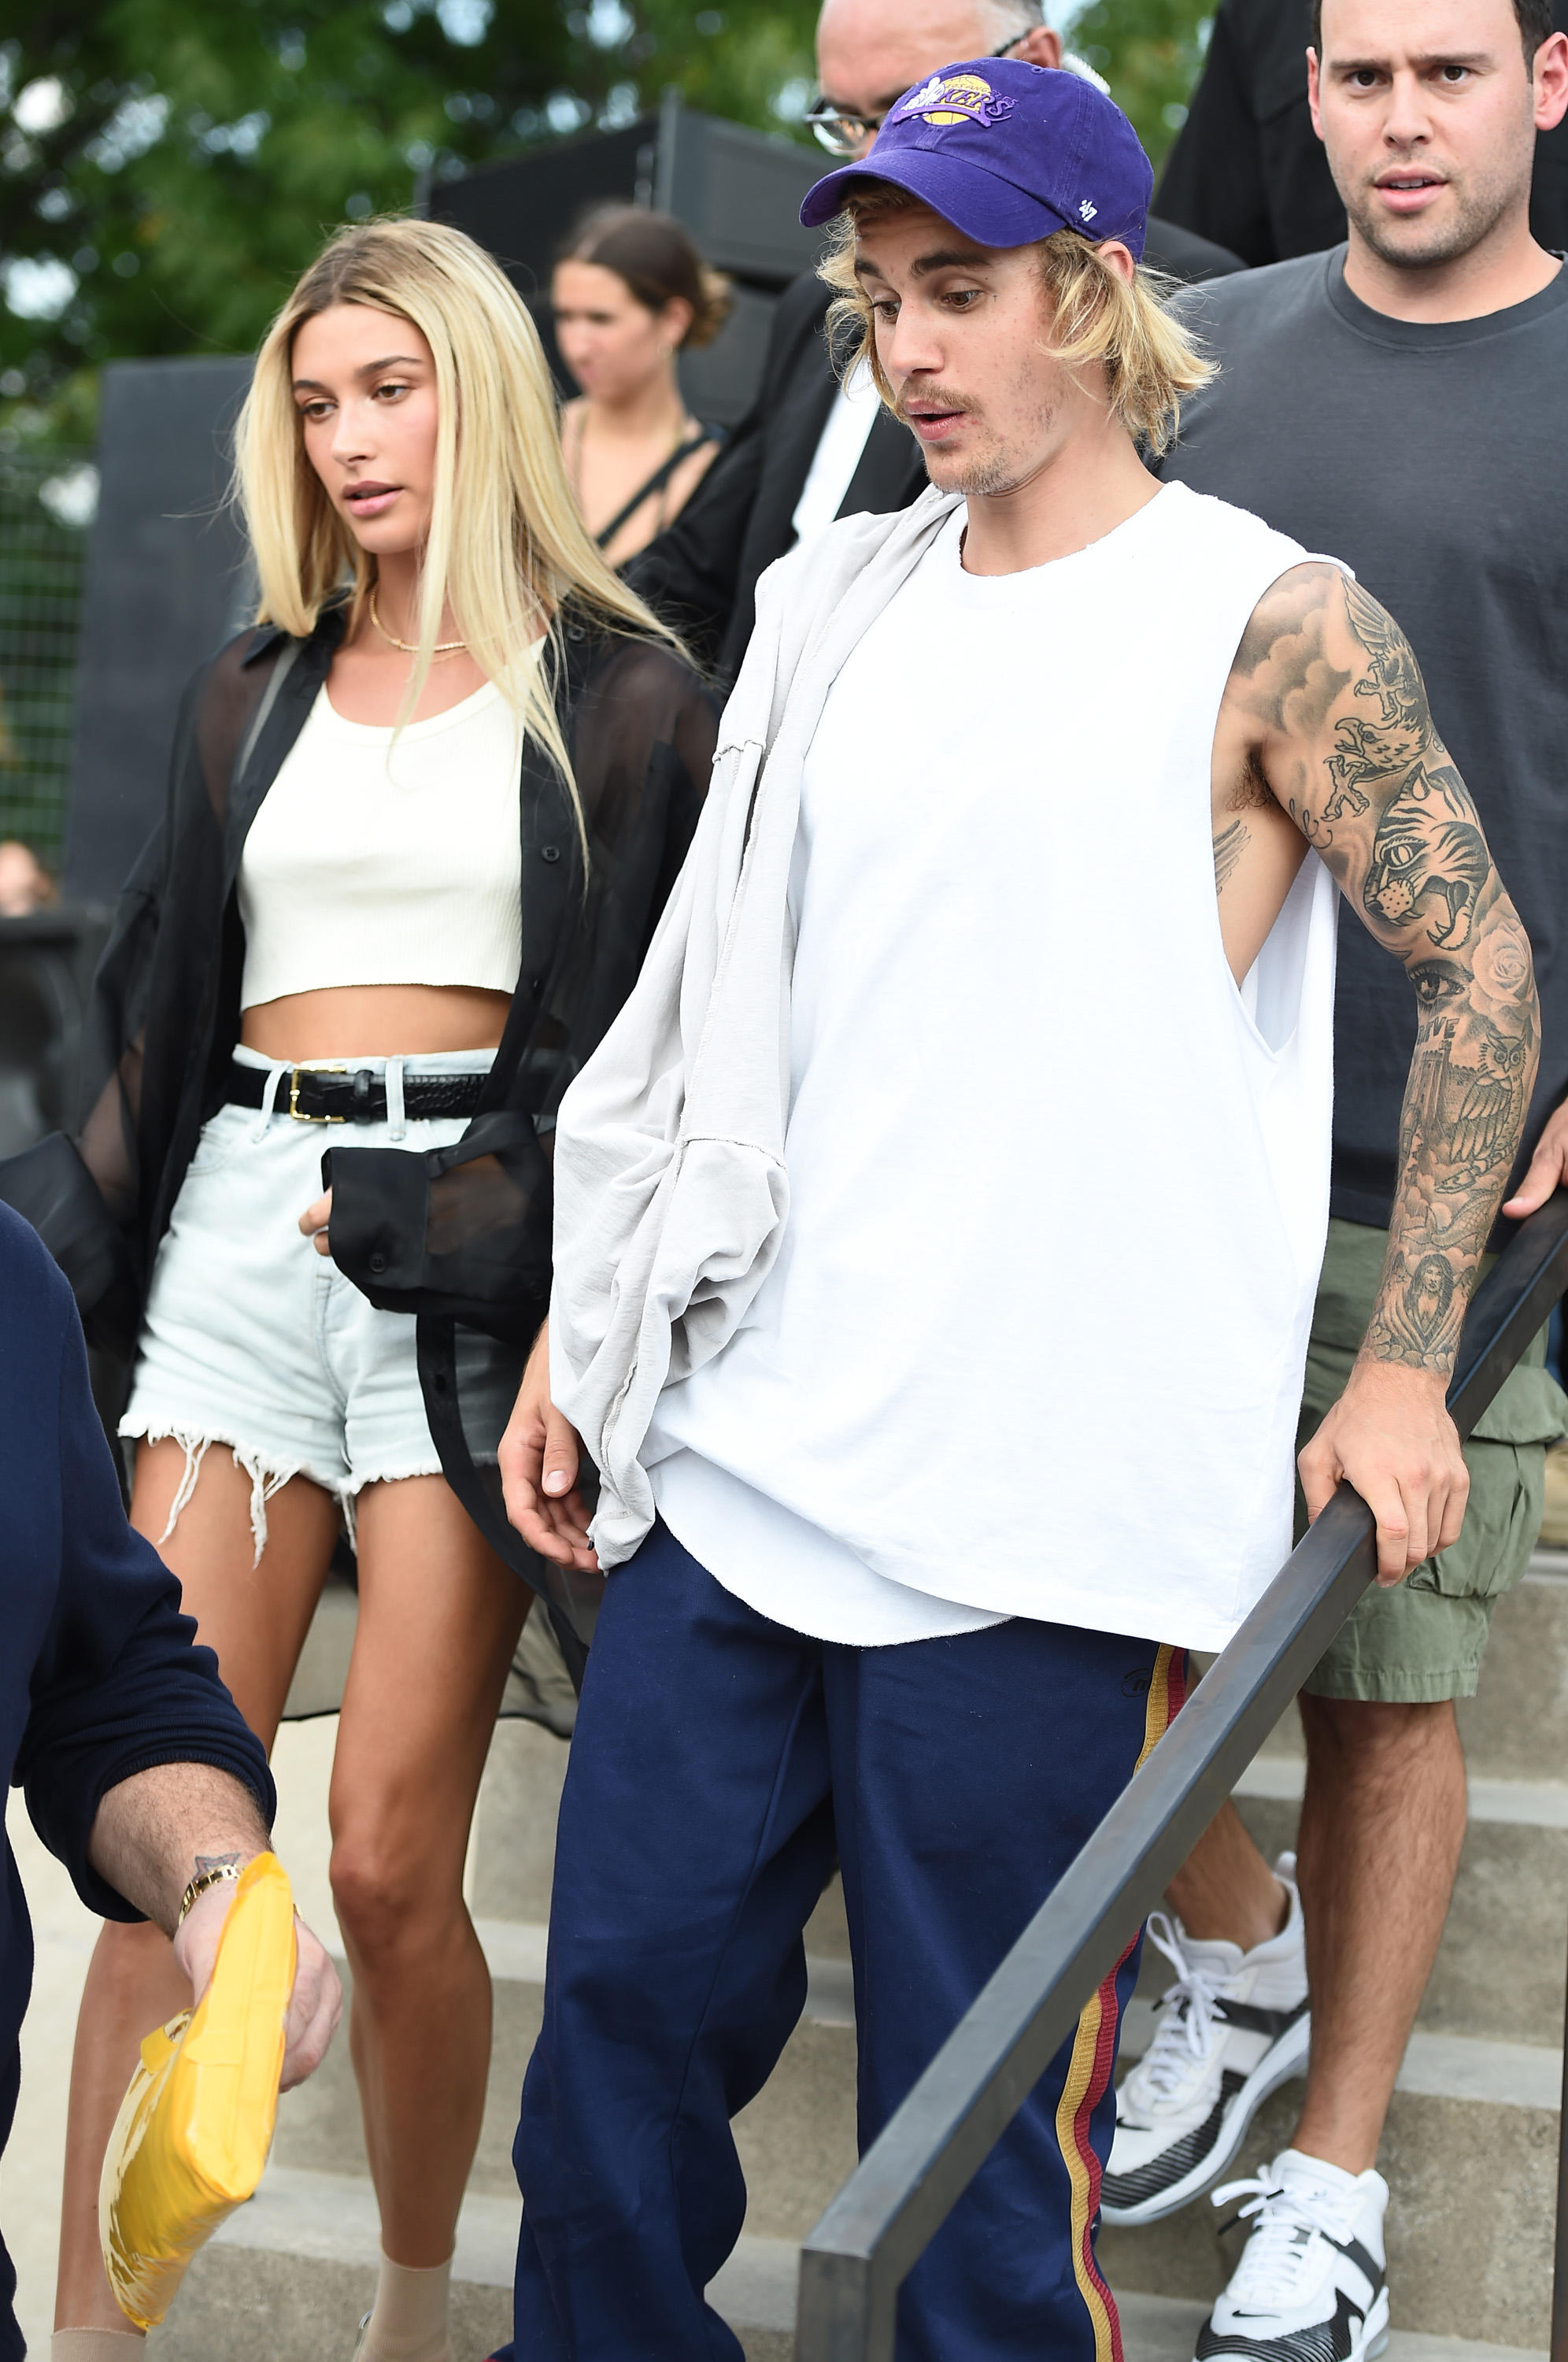 Justin Bieber and Hailey Baldwin reportedly tied the knot in September - CBS News1992 x 3000